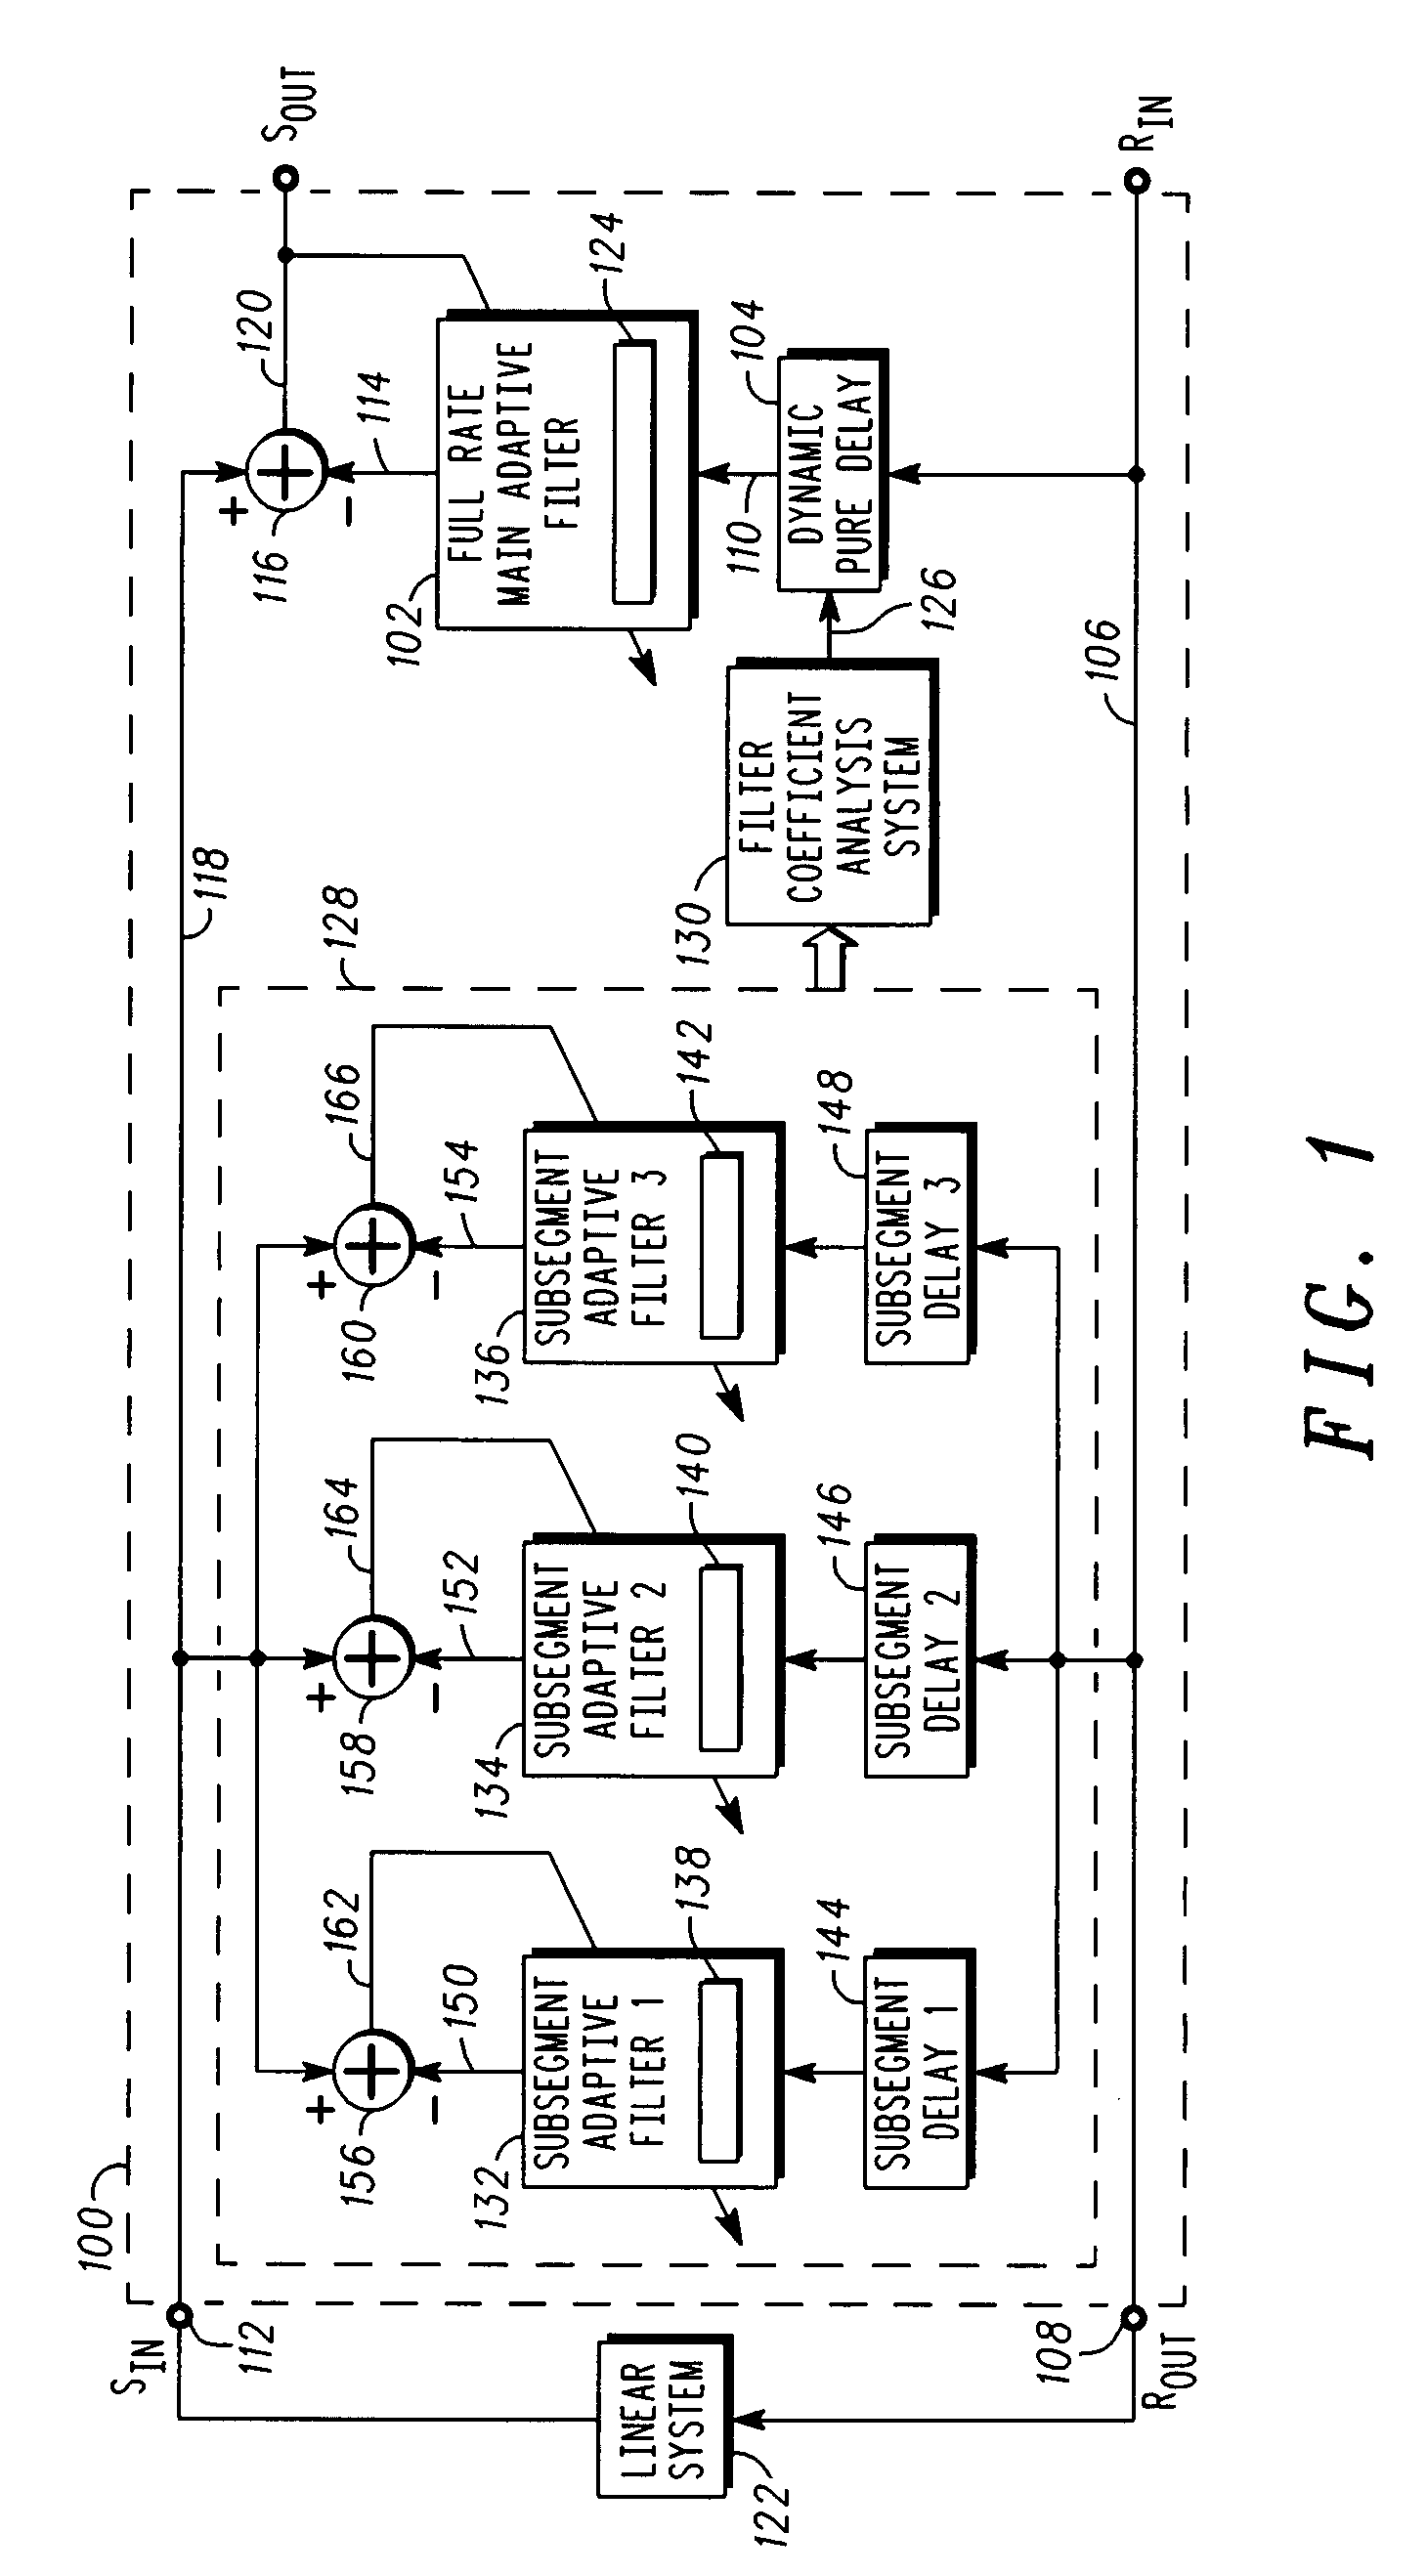 Estimating delay of an echo path in a communication system